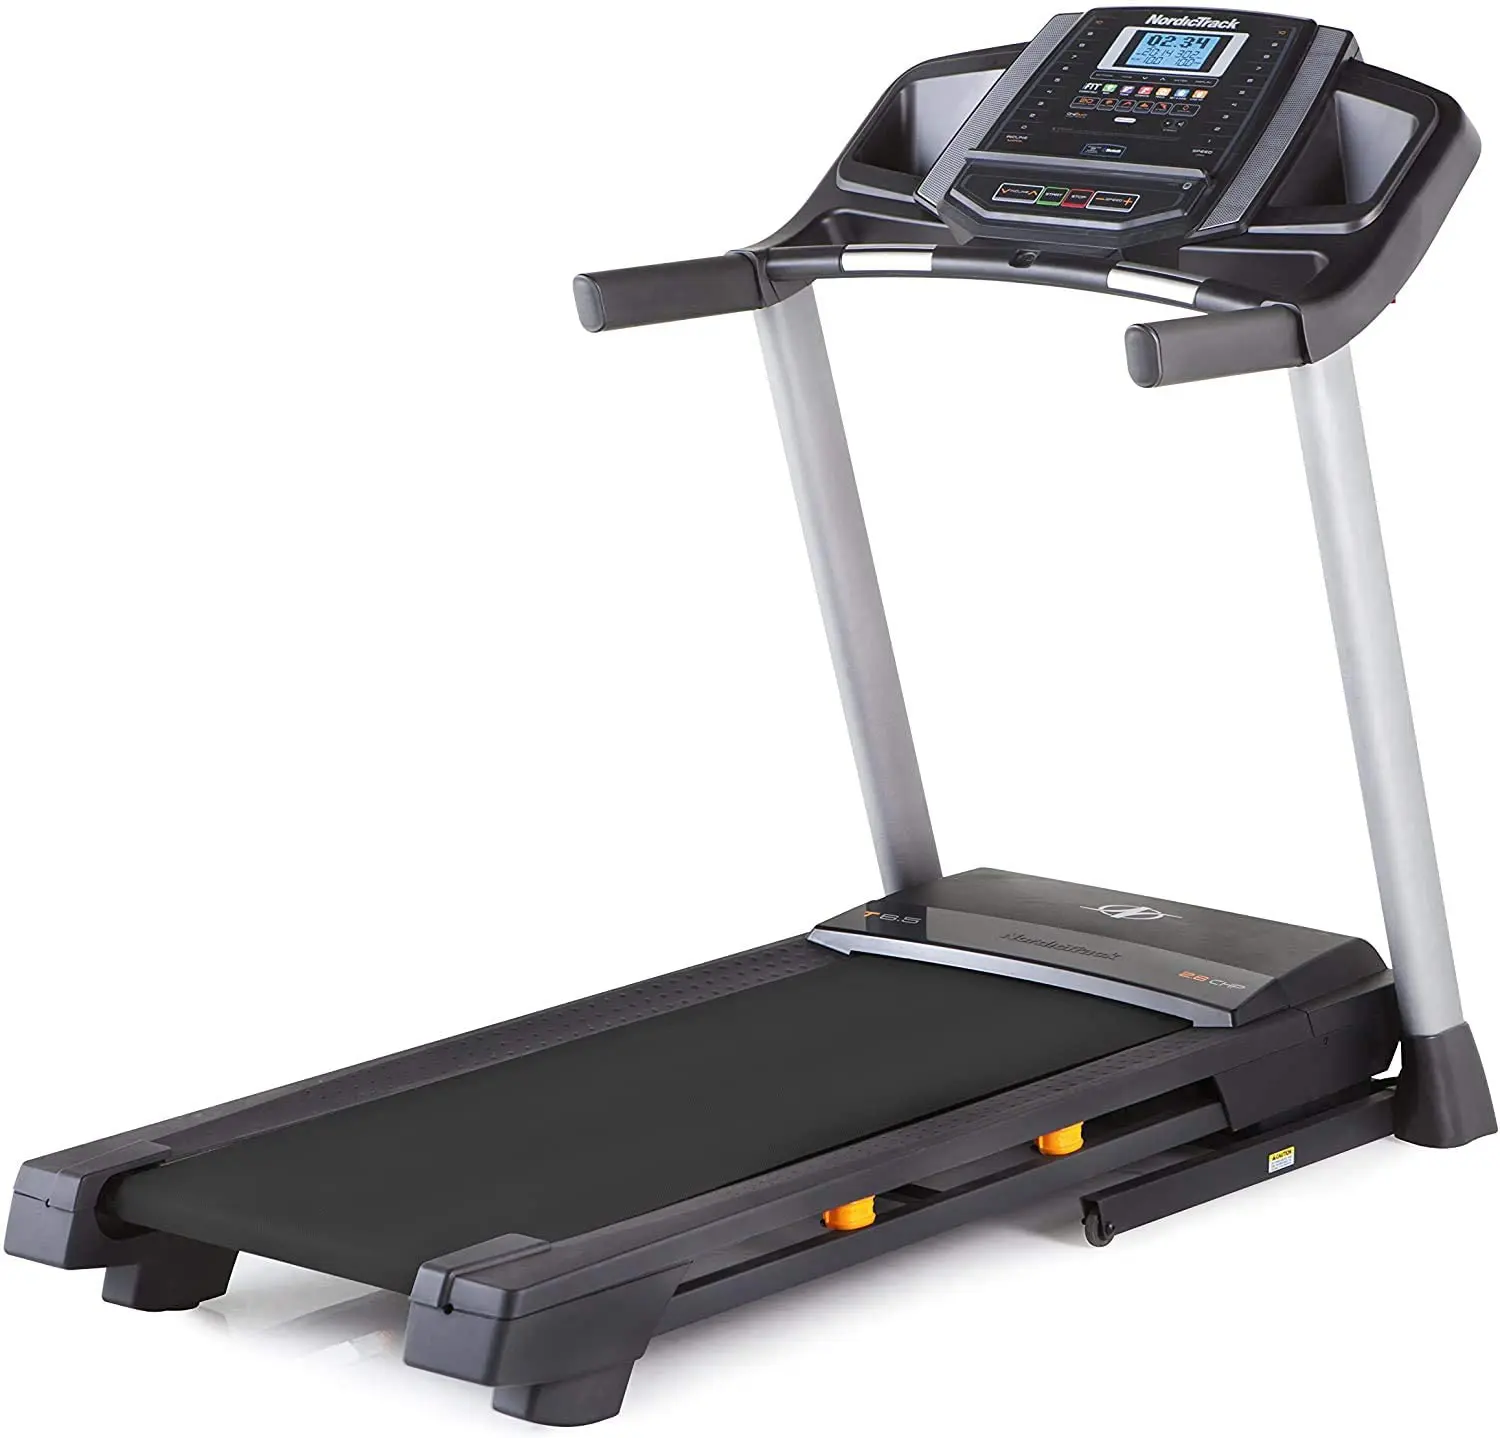 top rated treadmill 2021 NordicTrack T Series Treadmill T6.5S